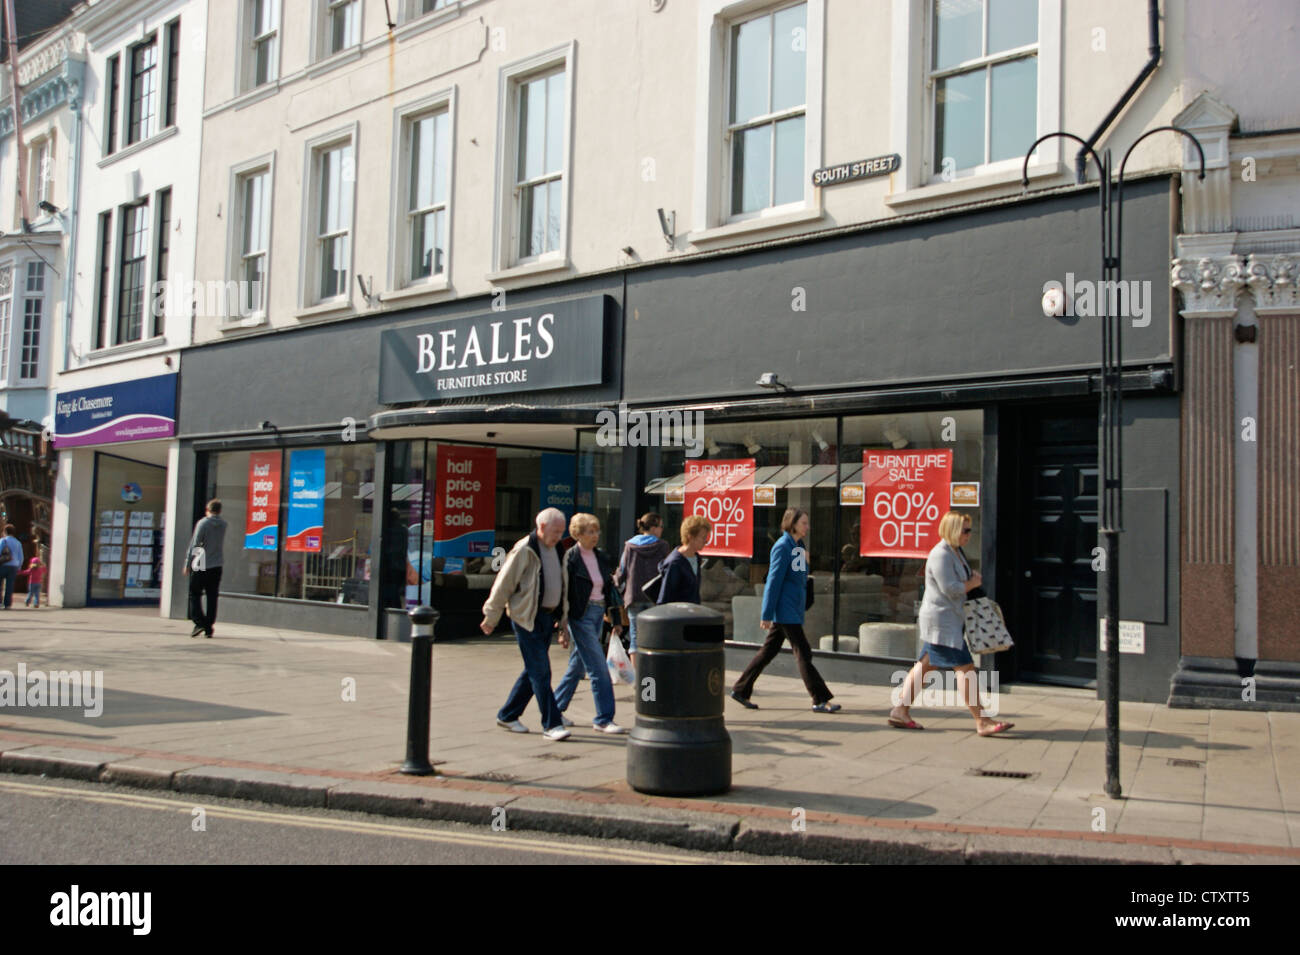 Beales department retailer store with a sale on Worthing West Sussex UK now closing down Stock Photo